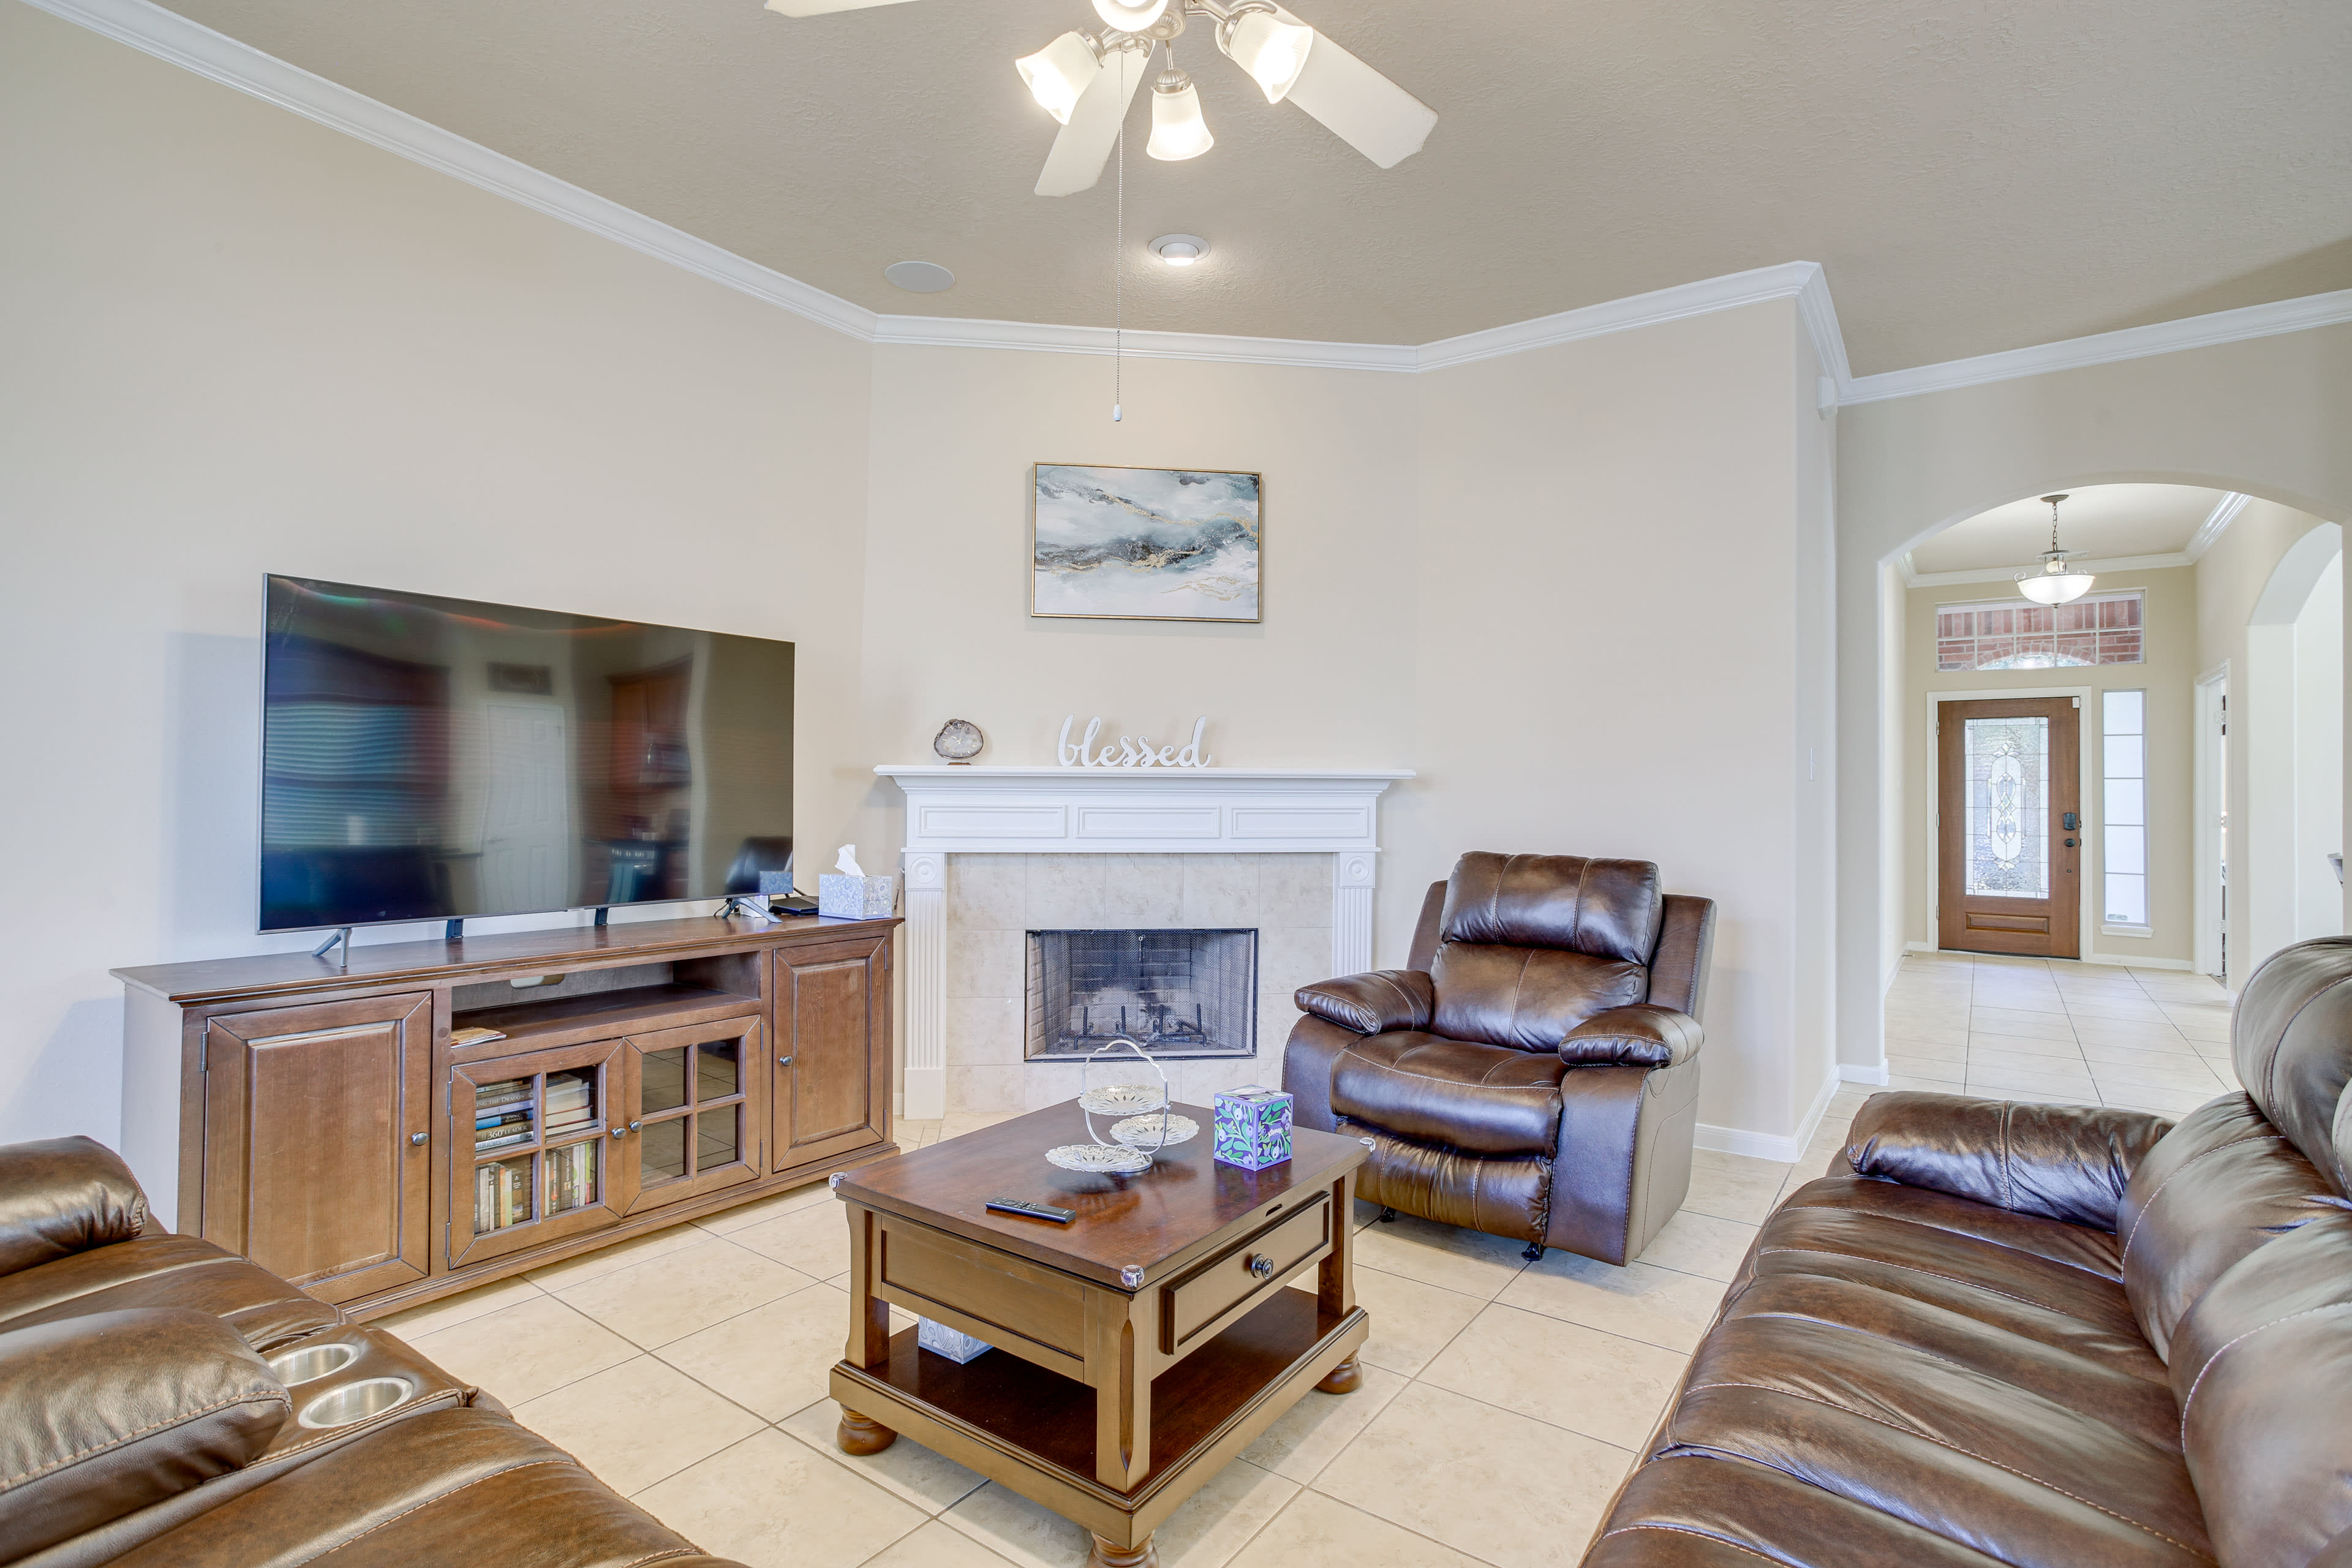 Living Room | Flat-Screen TV | Central Air Conditioning/Heat